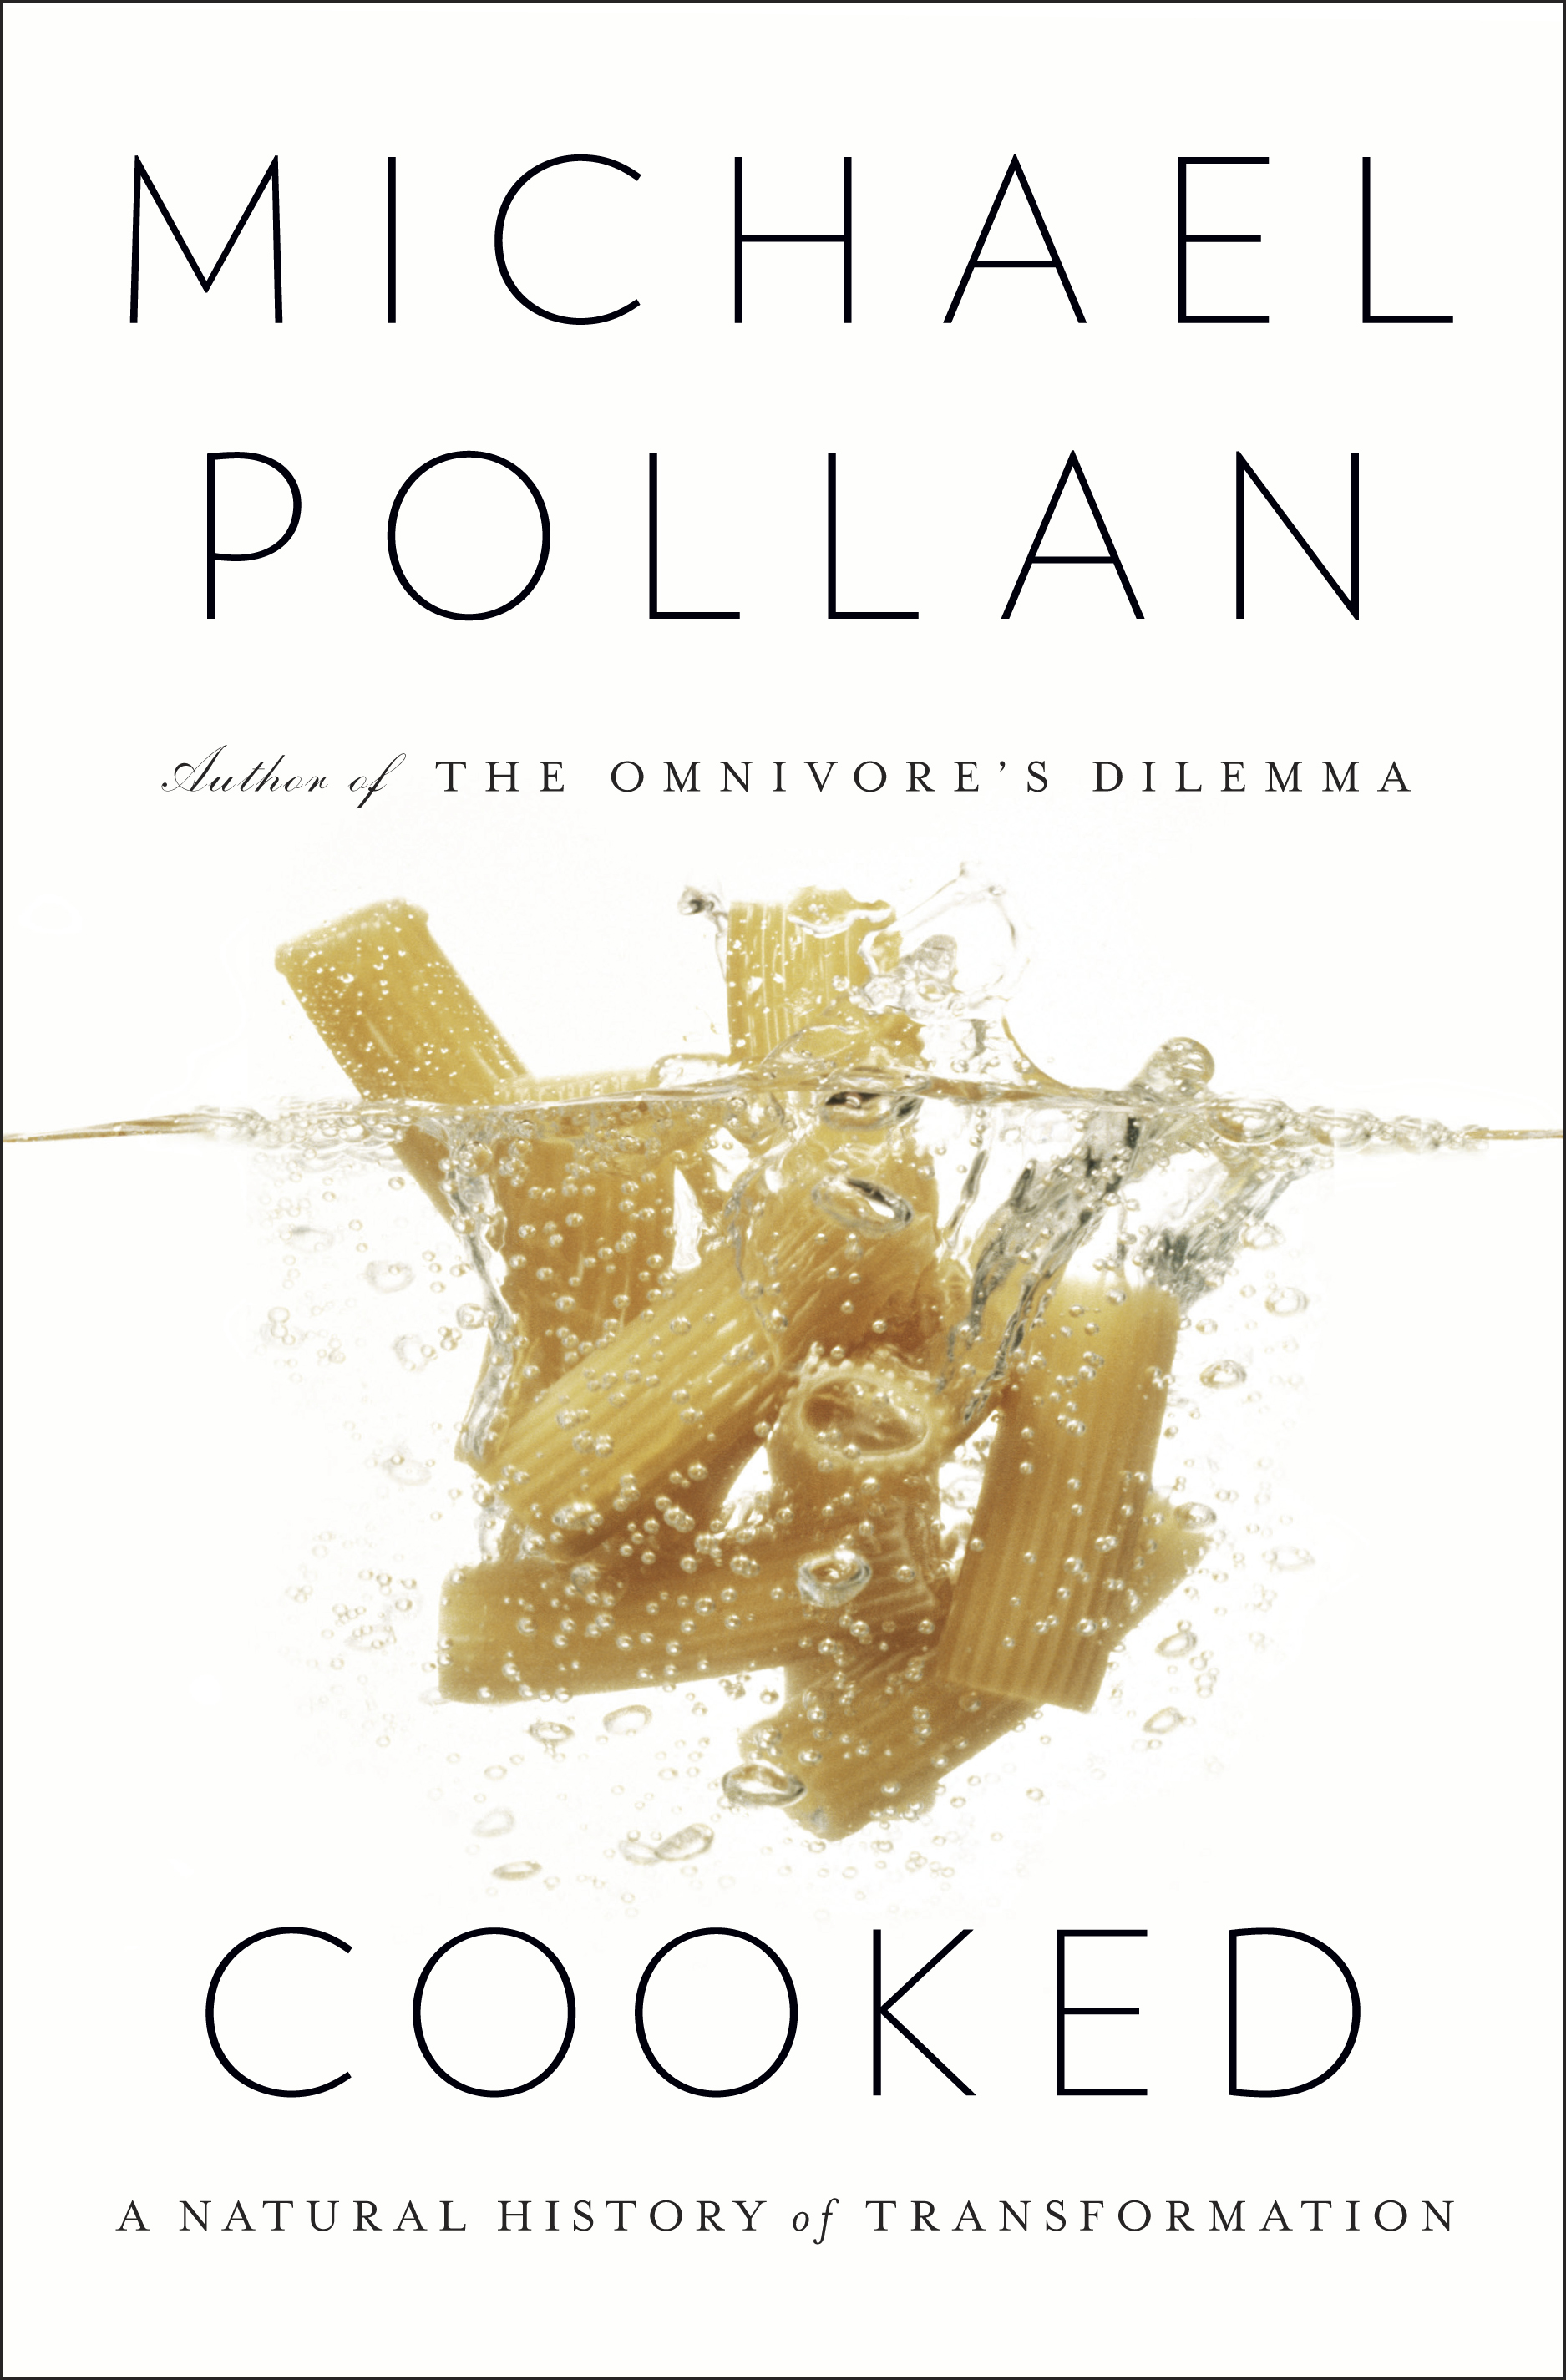 "Cooked" by Michael Pollan